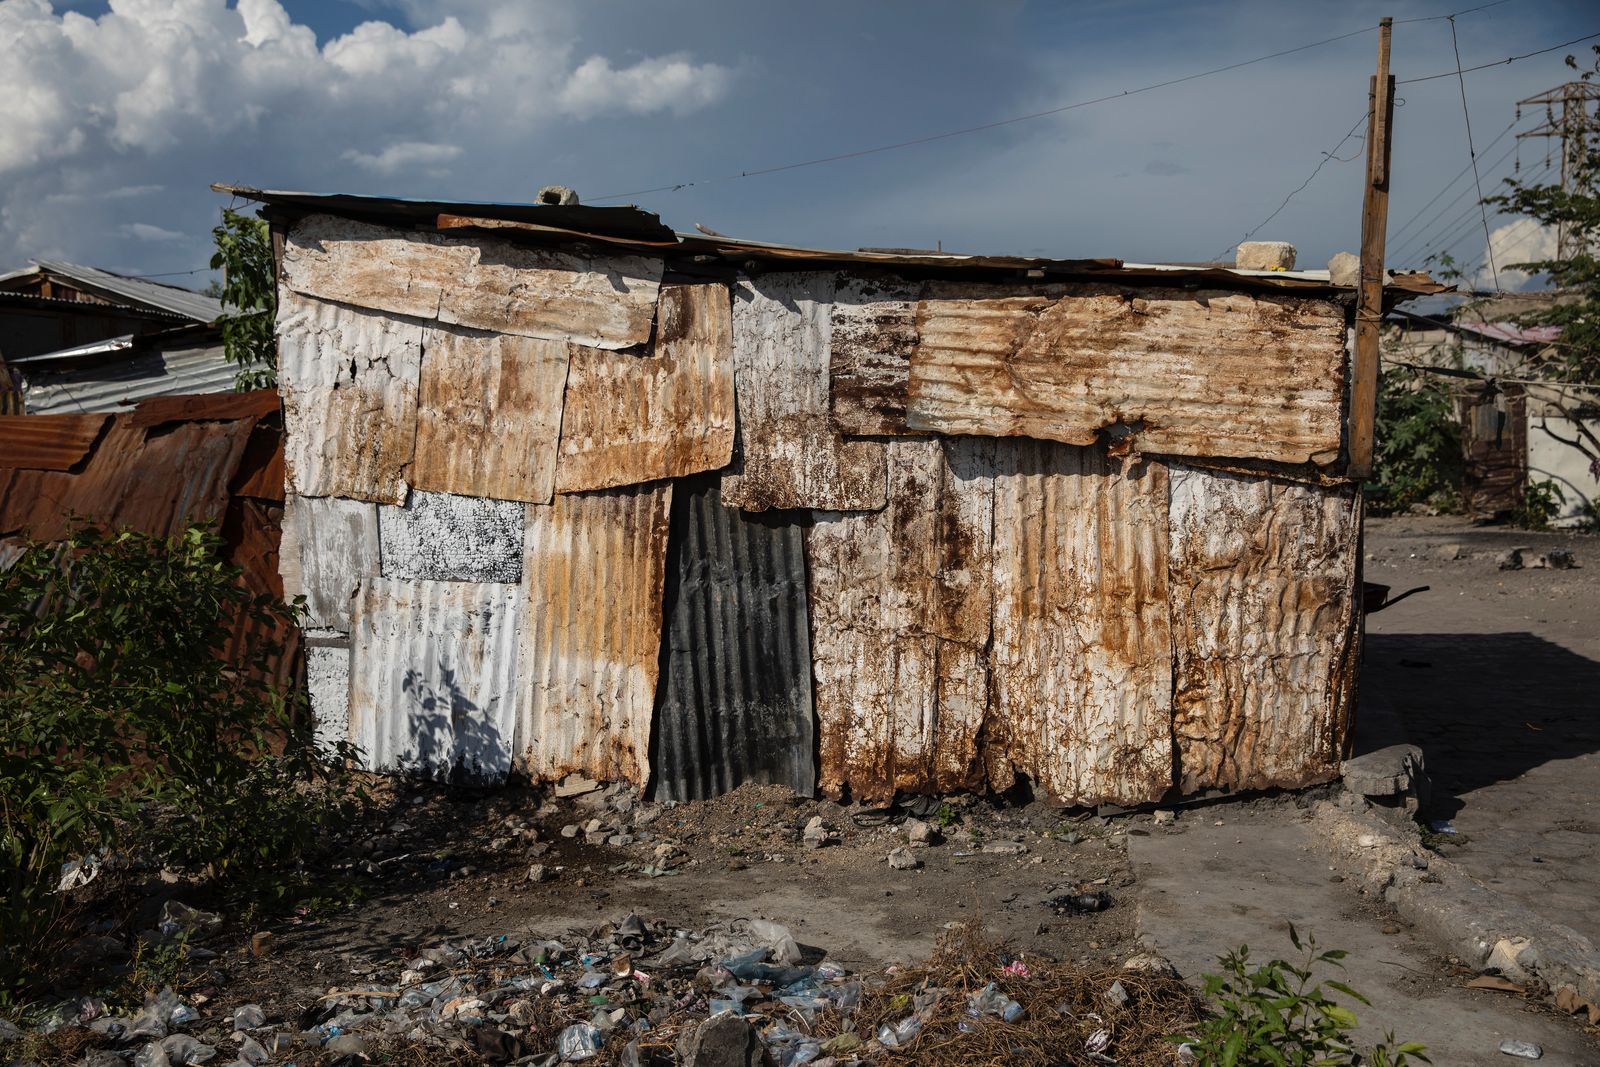 © RODRIGO ABD - A house built with recycled metal sheets in La Saline shanty town, in Port-au-Prince, Haiti, Monday, Sept. 13, 2021.